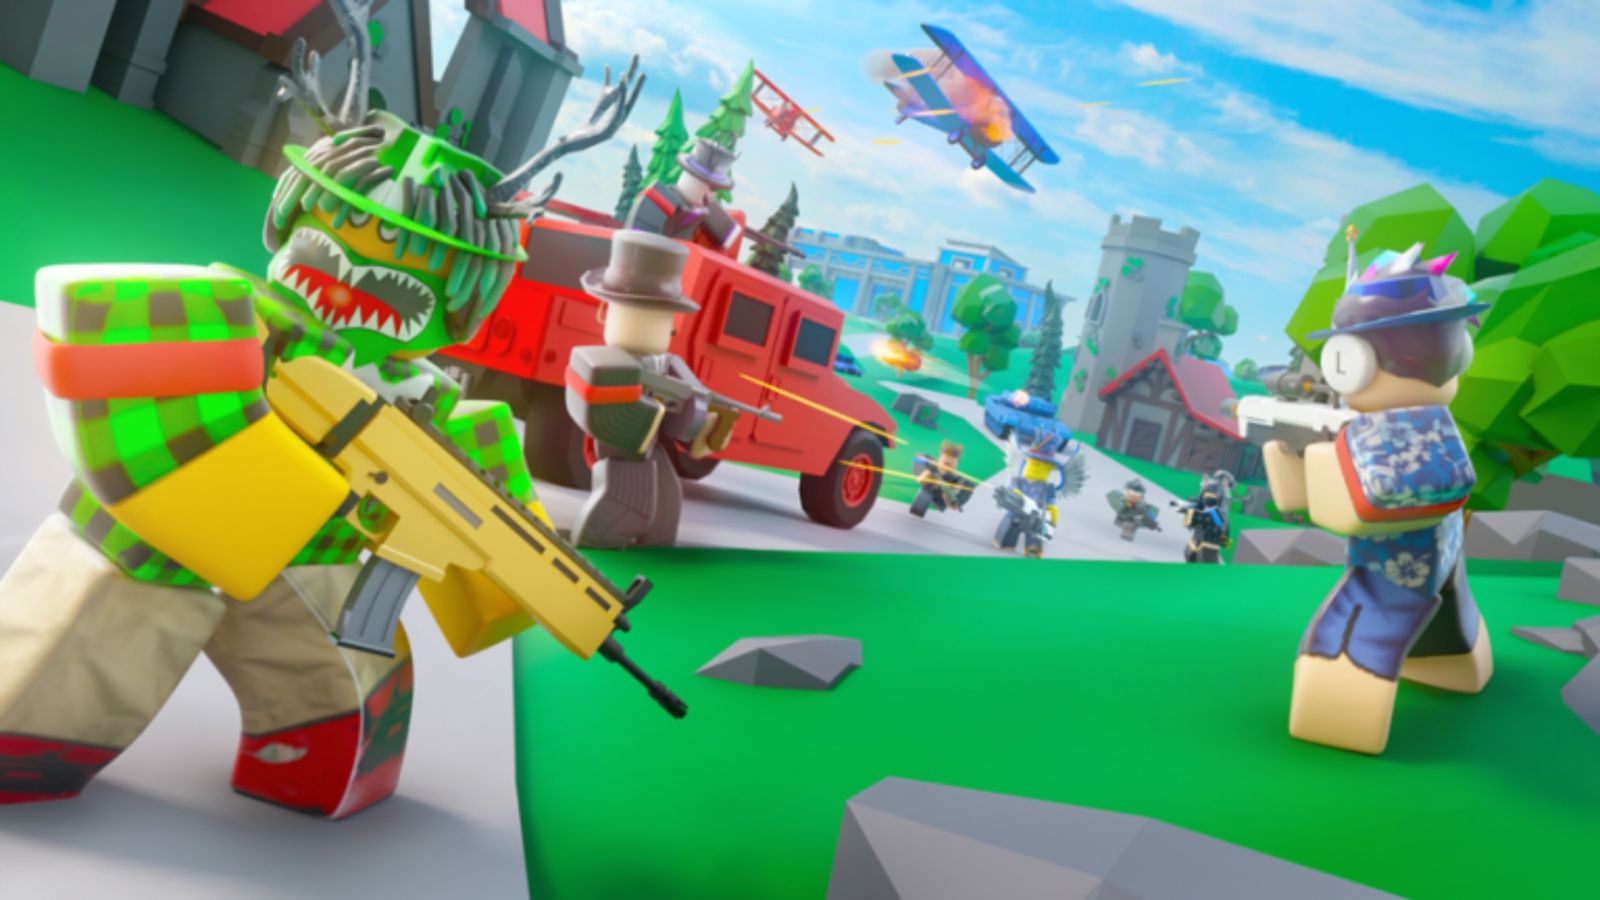 Screenshot from Base Battle, showing several Roblox characters in a gunfight